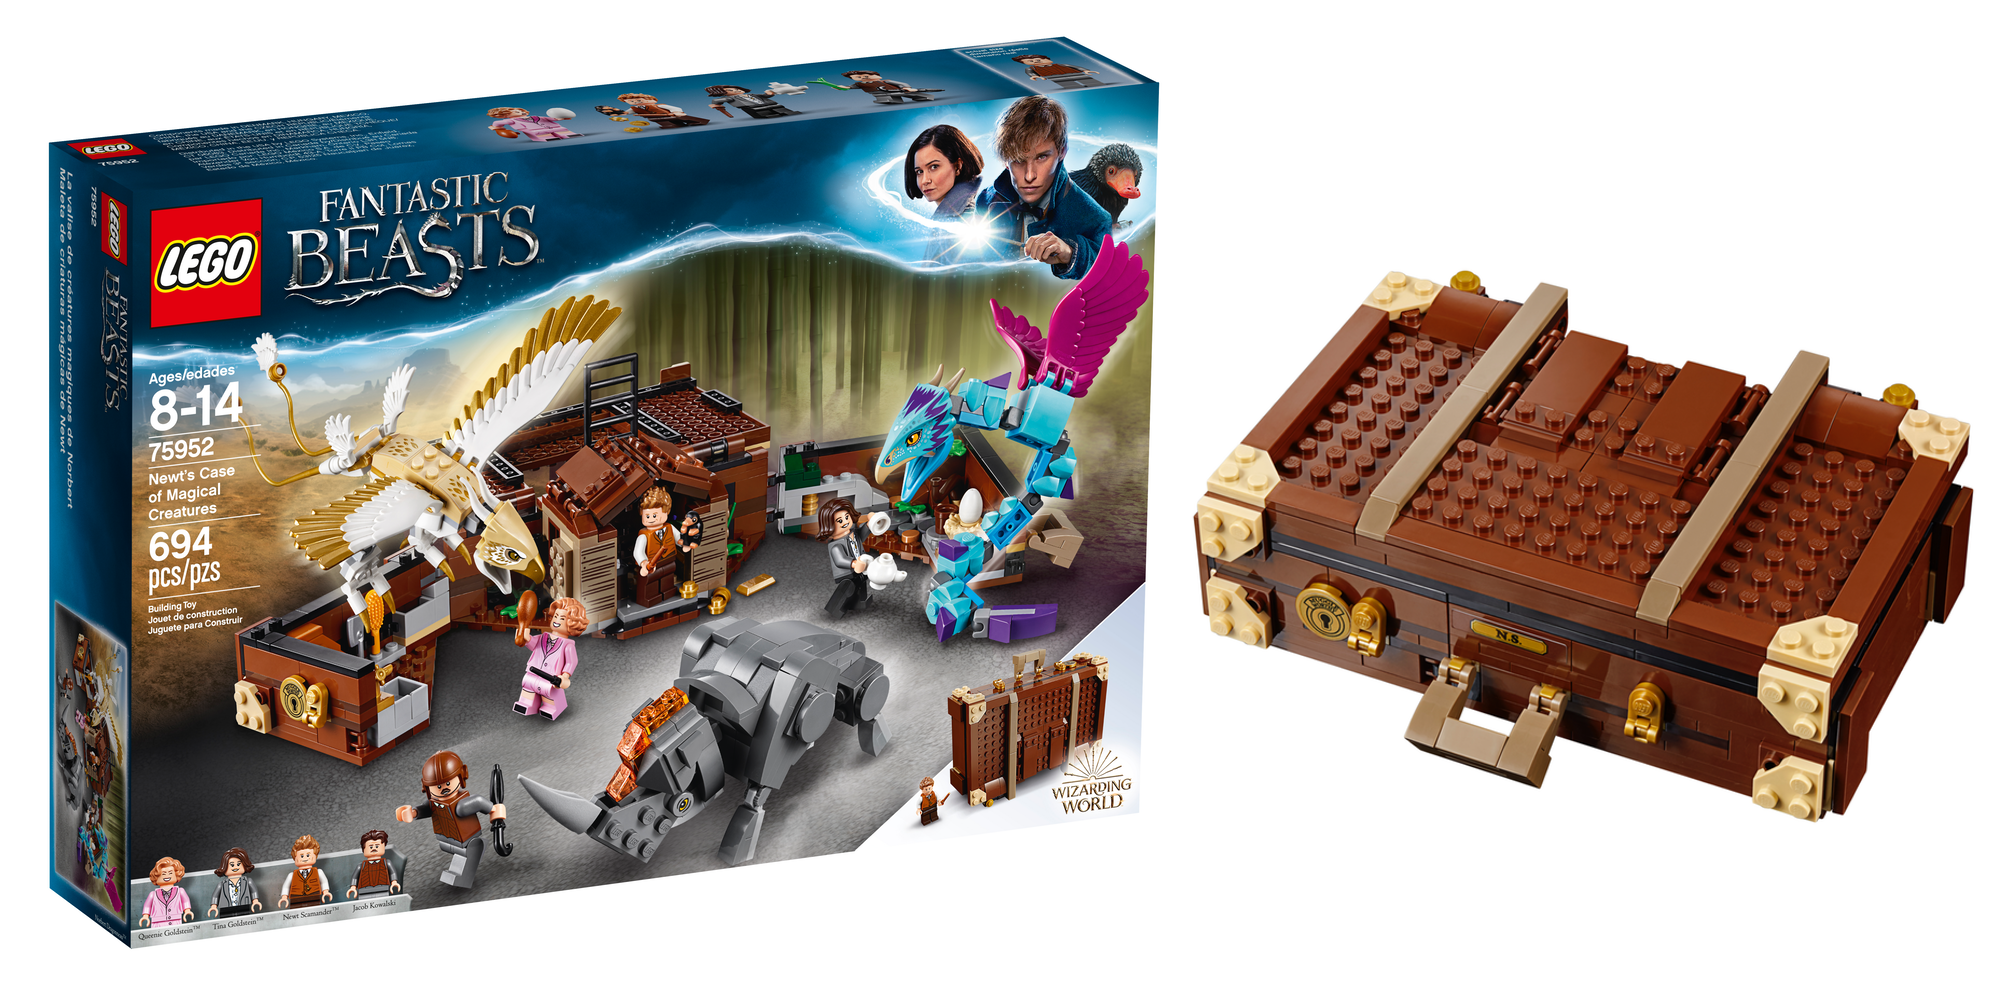 lego-unveils-two-new-harry-potter-kits-from-philosopher-s-stone-and-fantastic-beasts